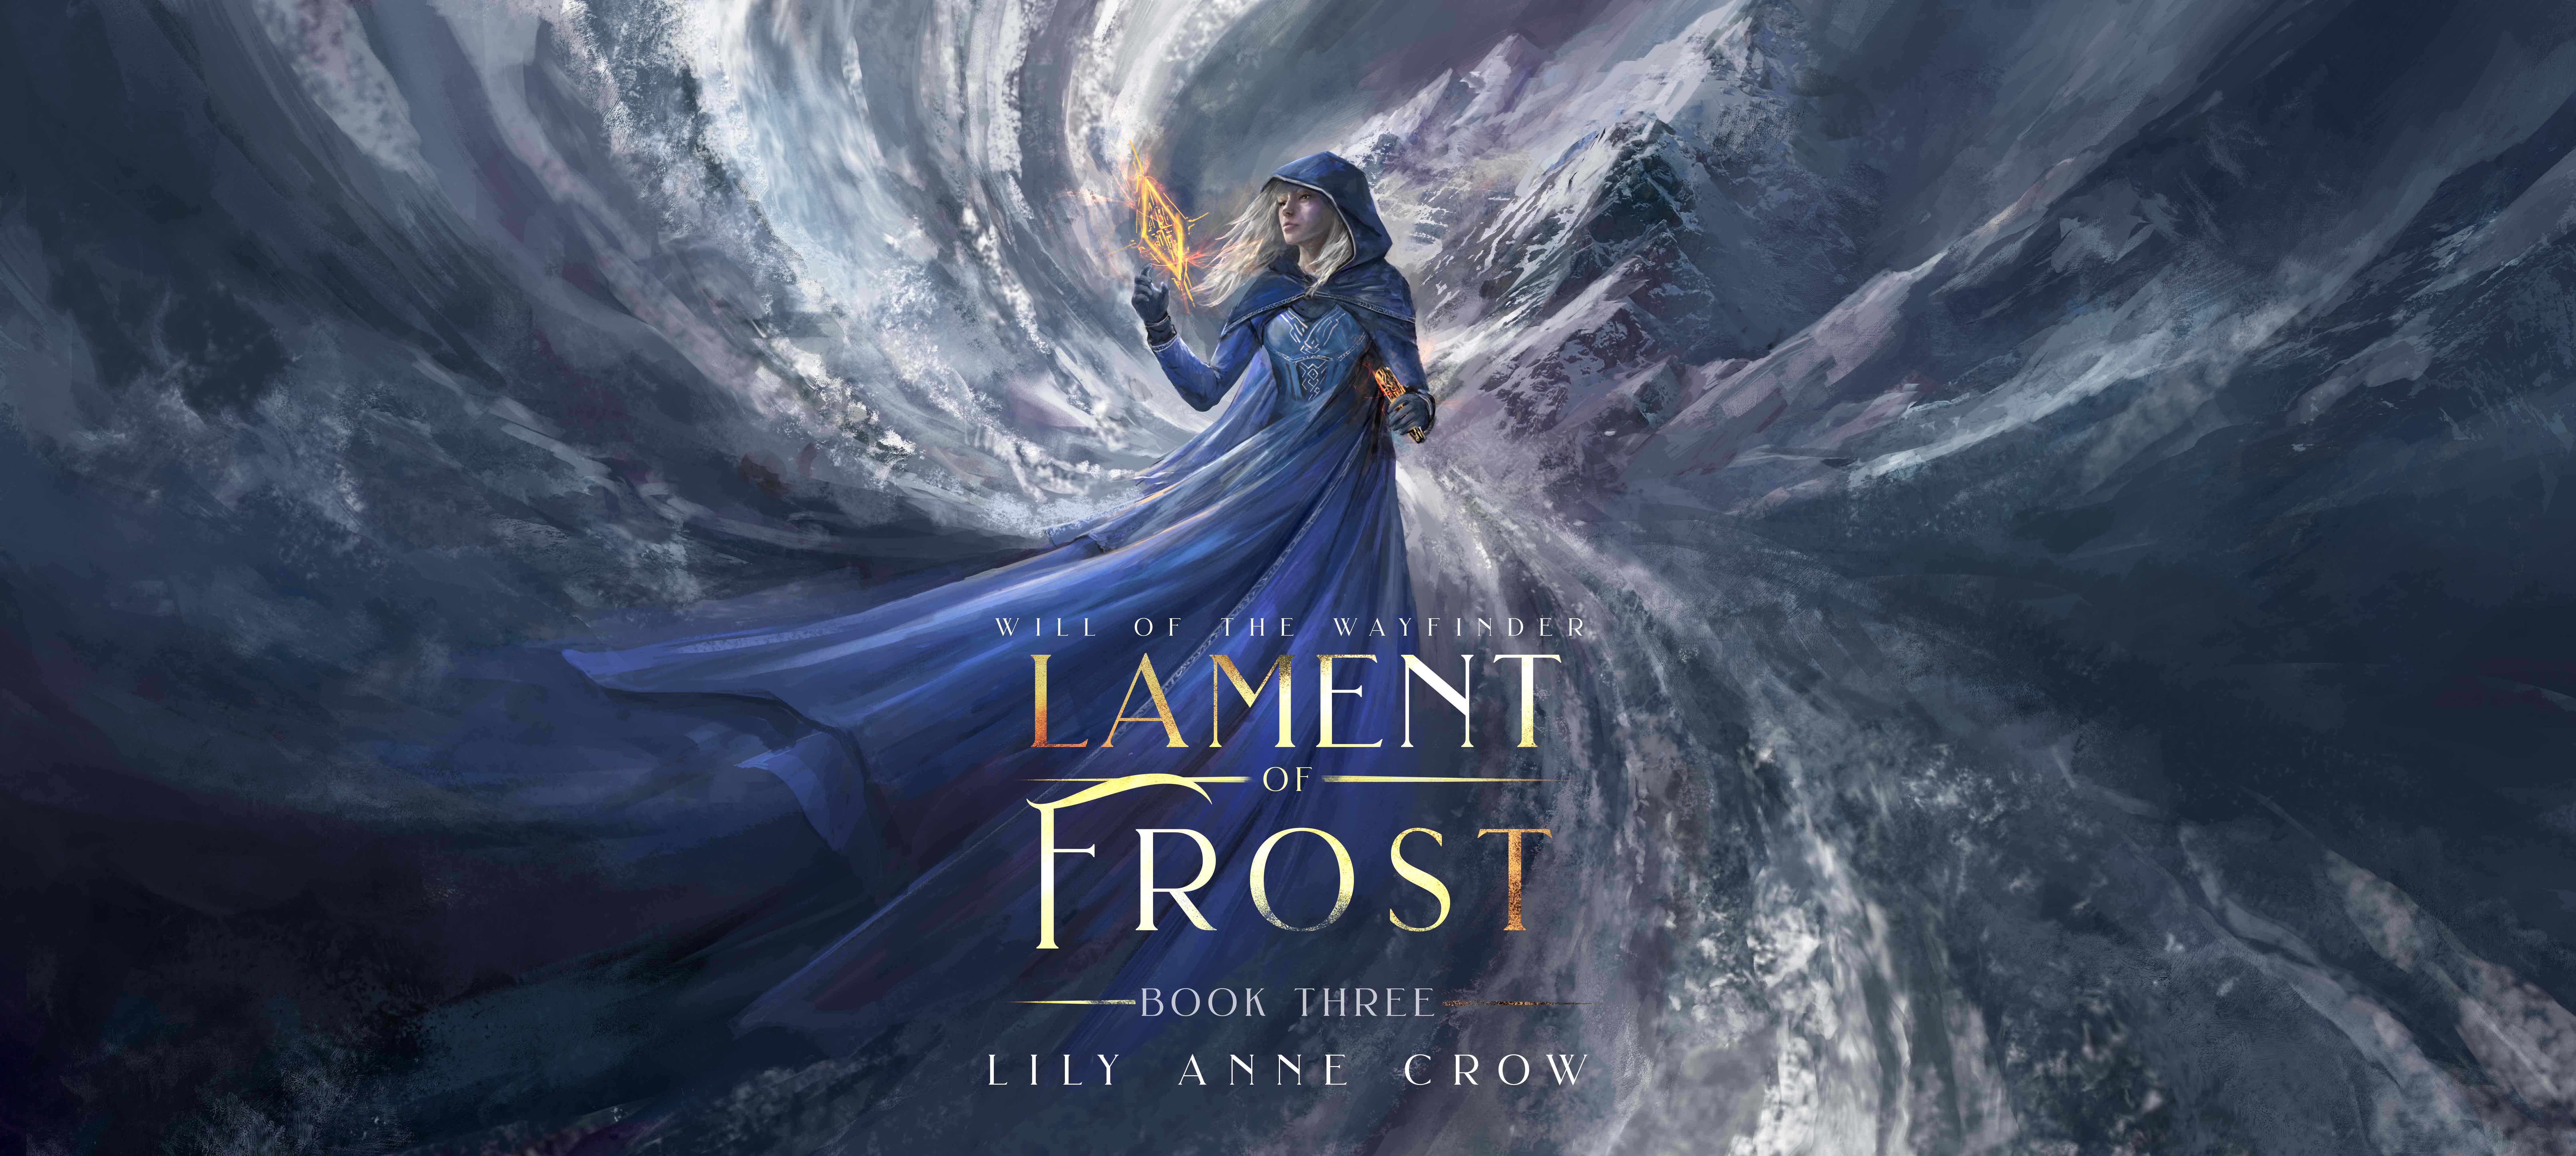 Full art of Lament of Frost, by Lily Anne Crow